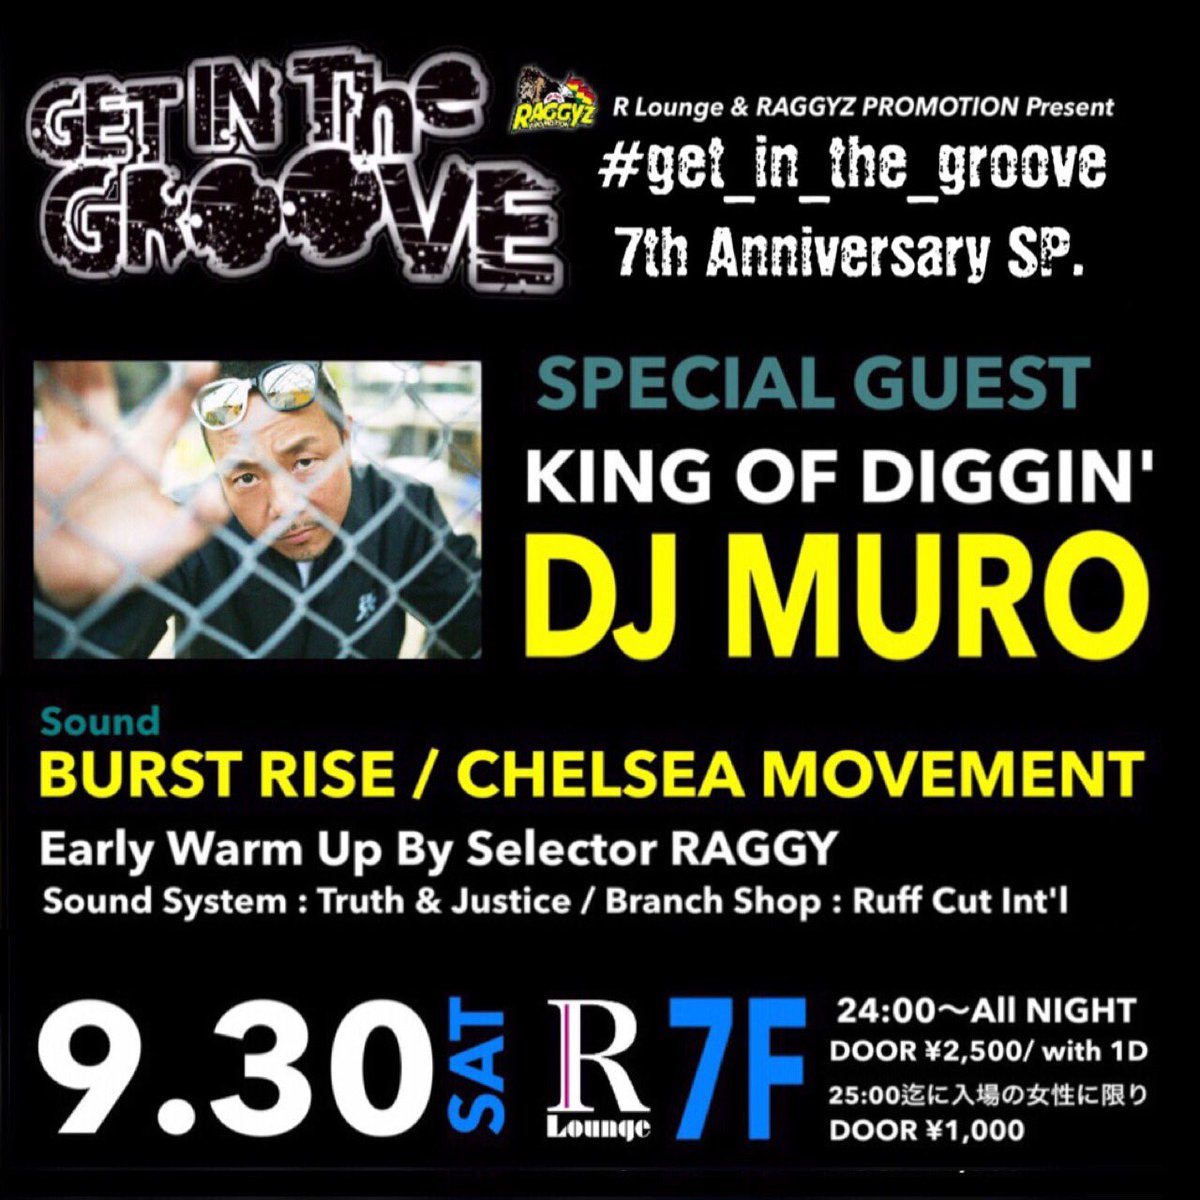 9.30 GET IN THE GROOVE 7th Anniversary SP. at R Lounge 7F